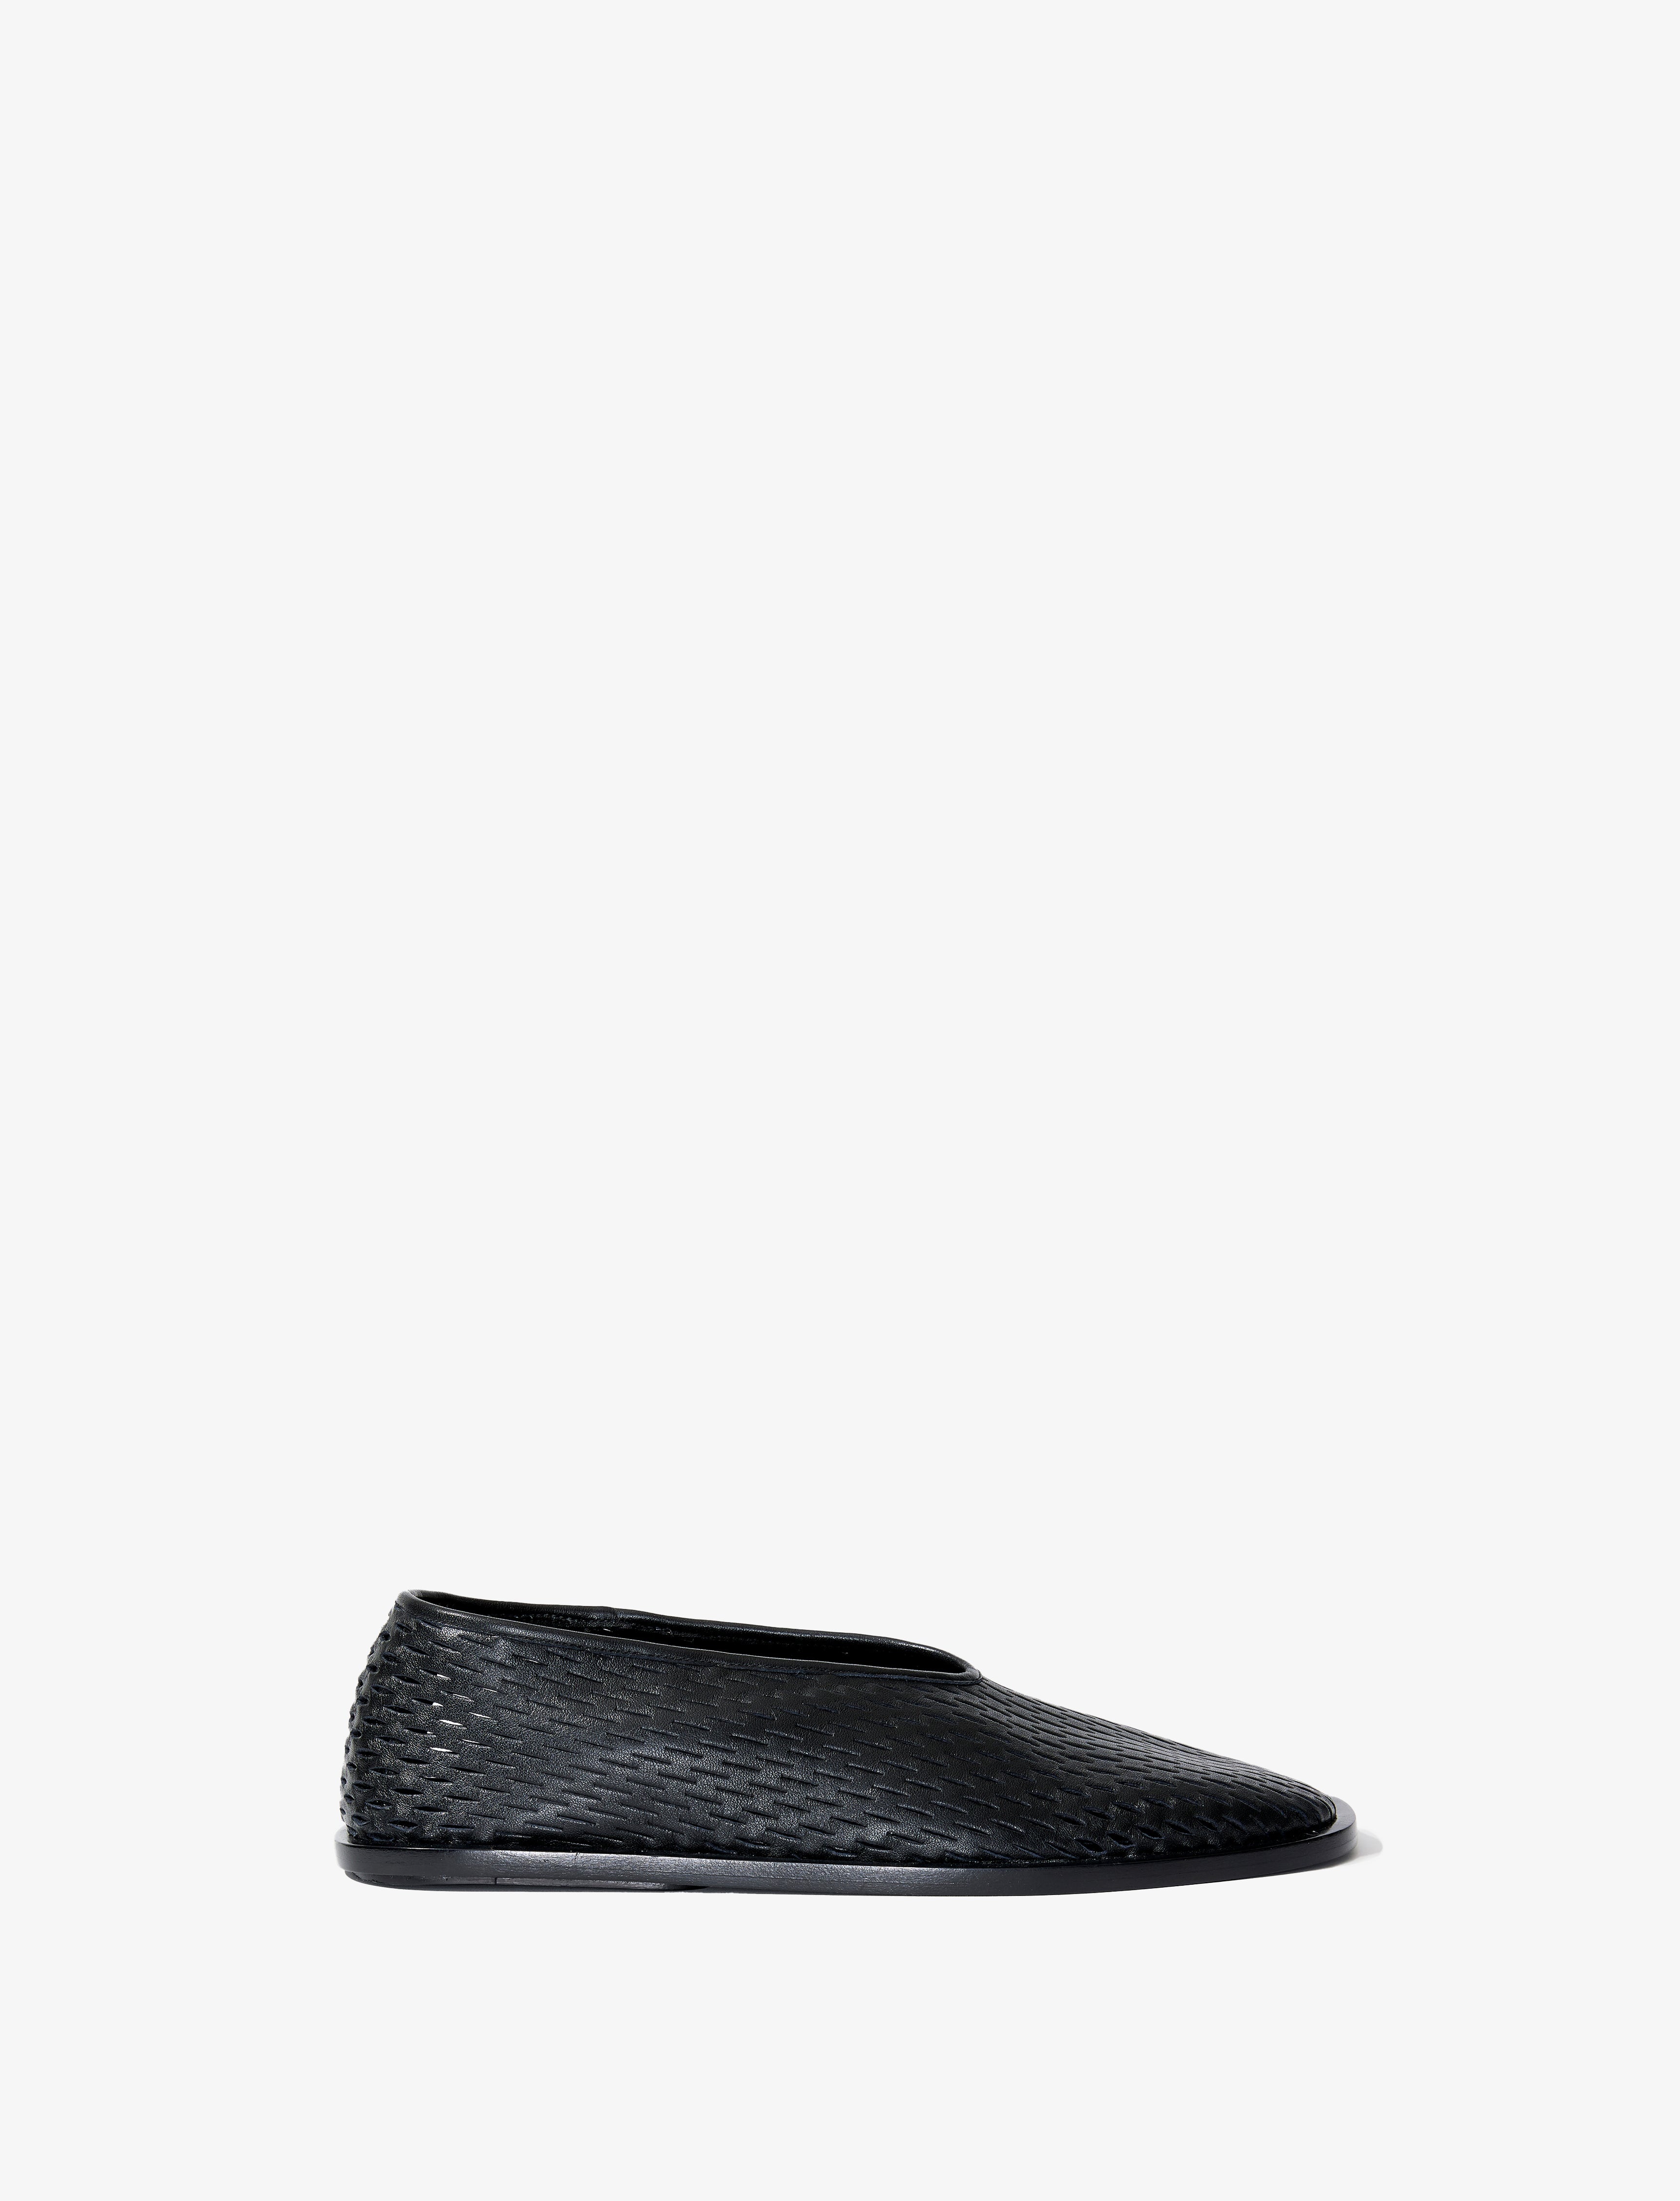 Square Perforated Slippers - 1